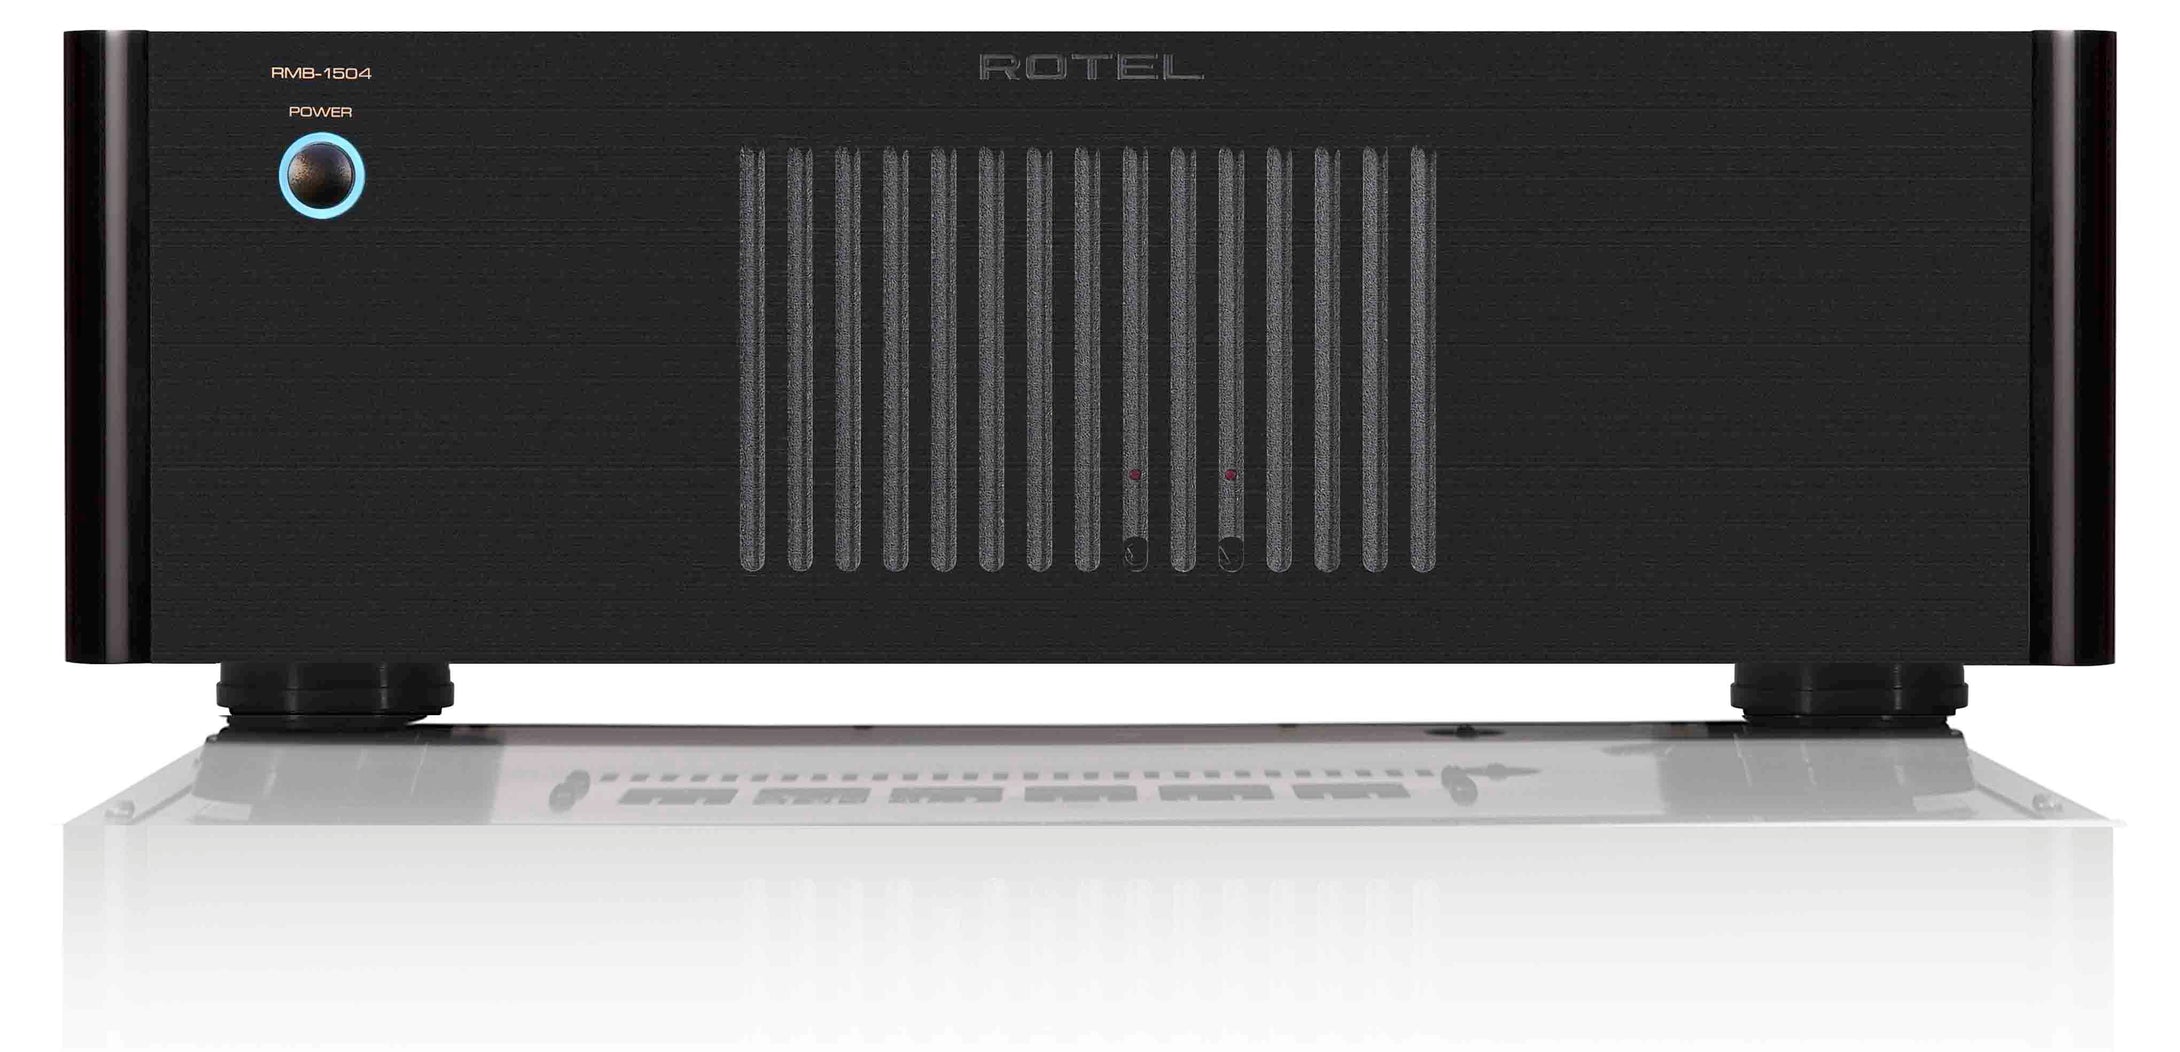 ROTEL RMB-1504 4-CHANNEL POWER AMPLIFIER